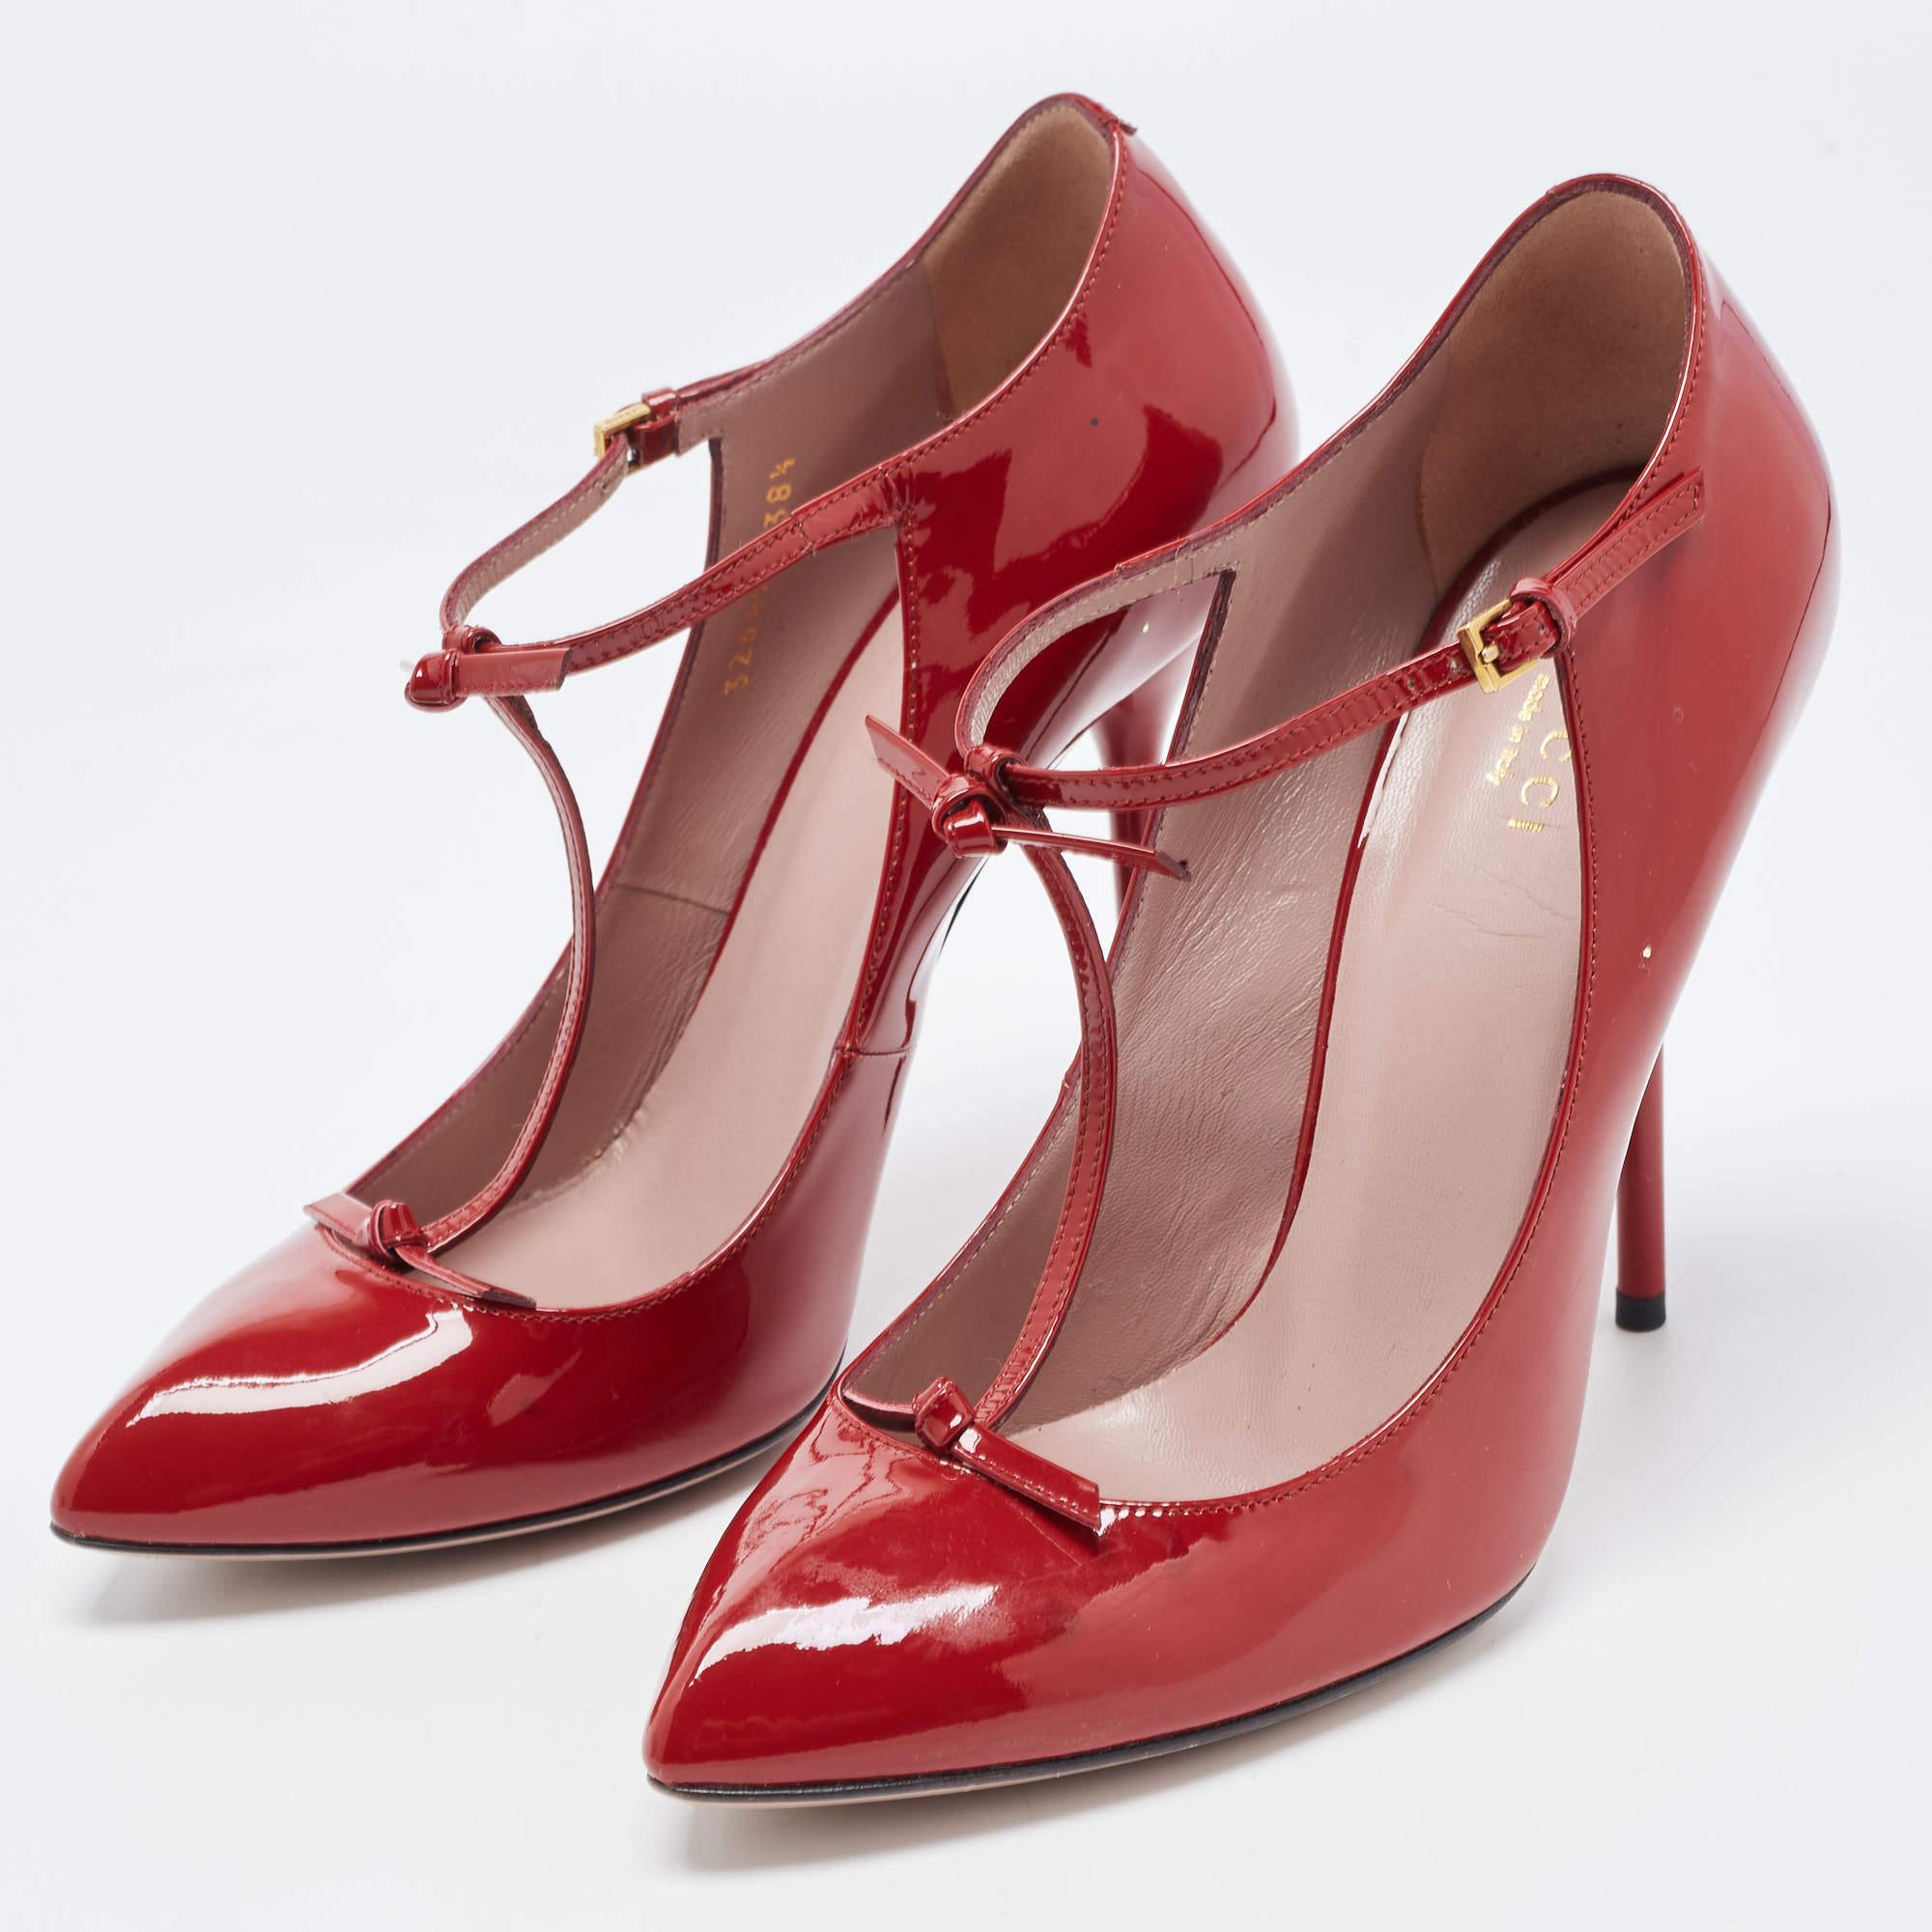 Gucci Red Patent Leather Bow Accents T-Strap Pumps Size 38.5 1